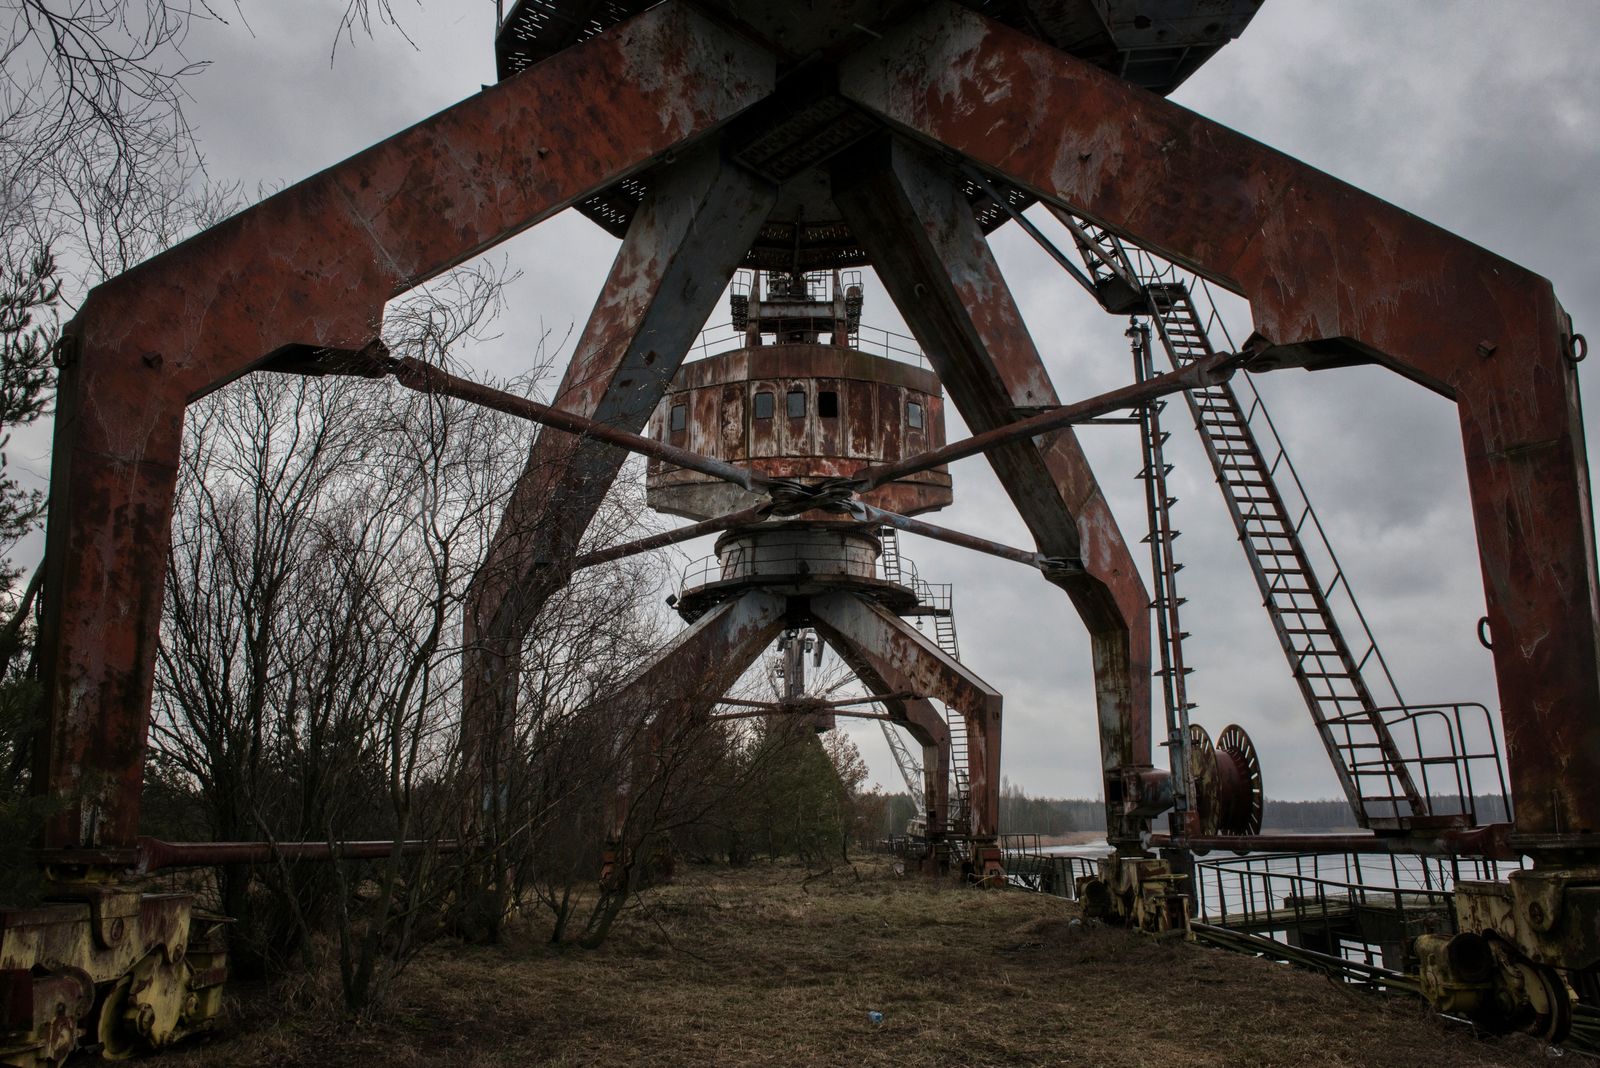 © Pierpaolo Mittica - Abandoned cranes in the Chernobyl river port. Chernobyl Exclusion Zone.